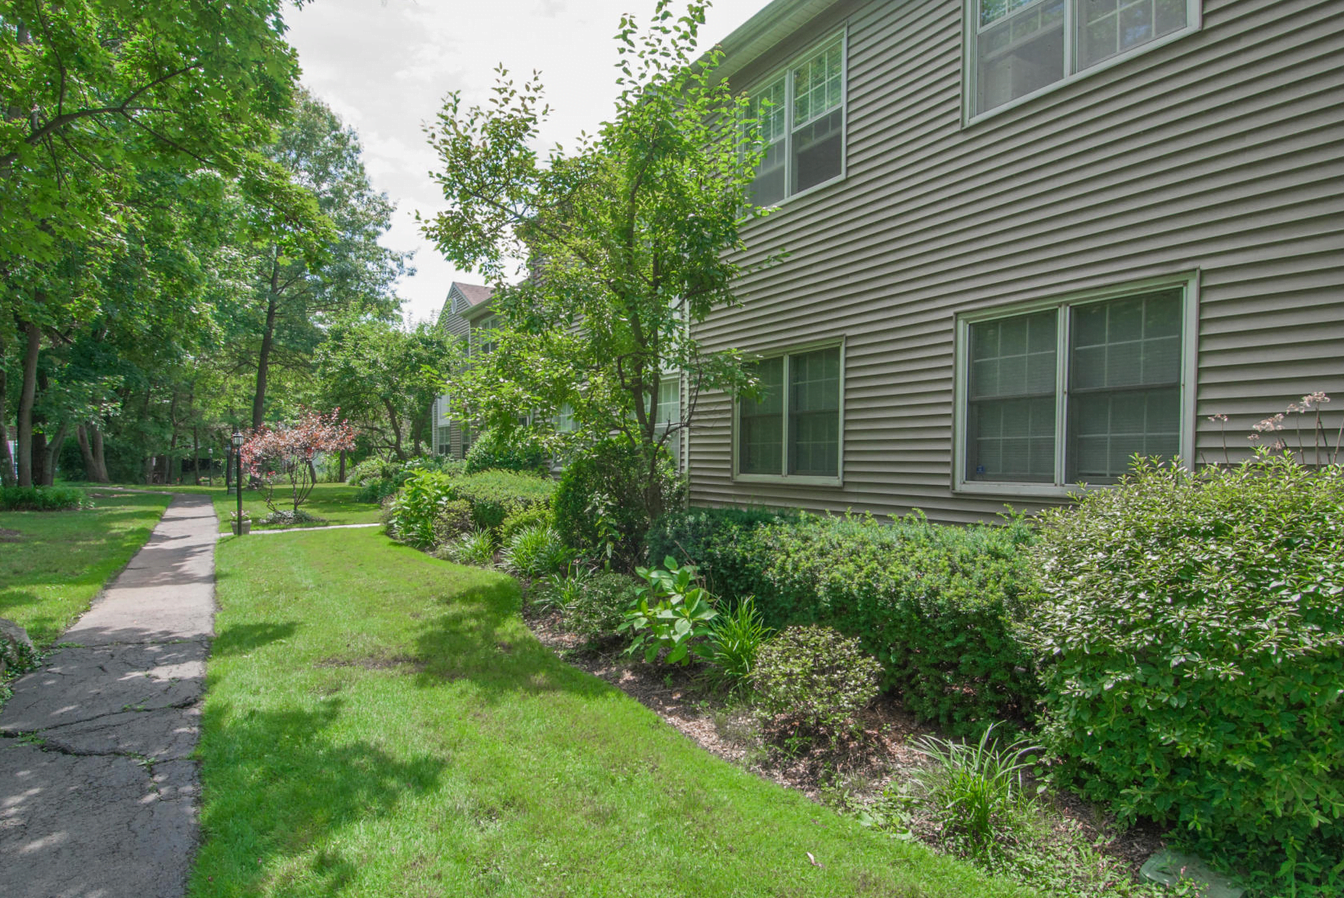 51 Old Kings Highway #16, Old Greenwich, CT 06870